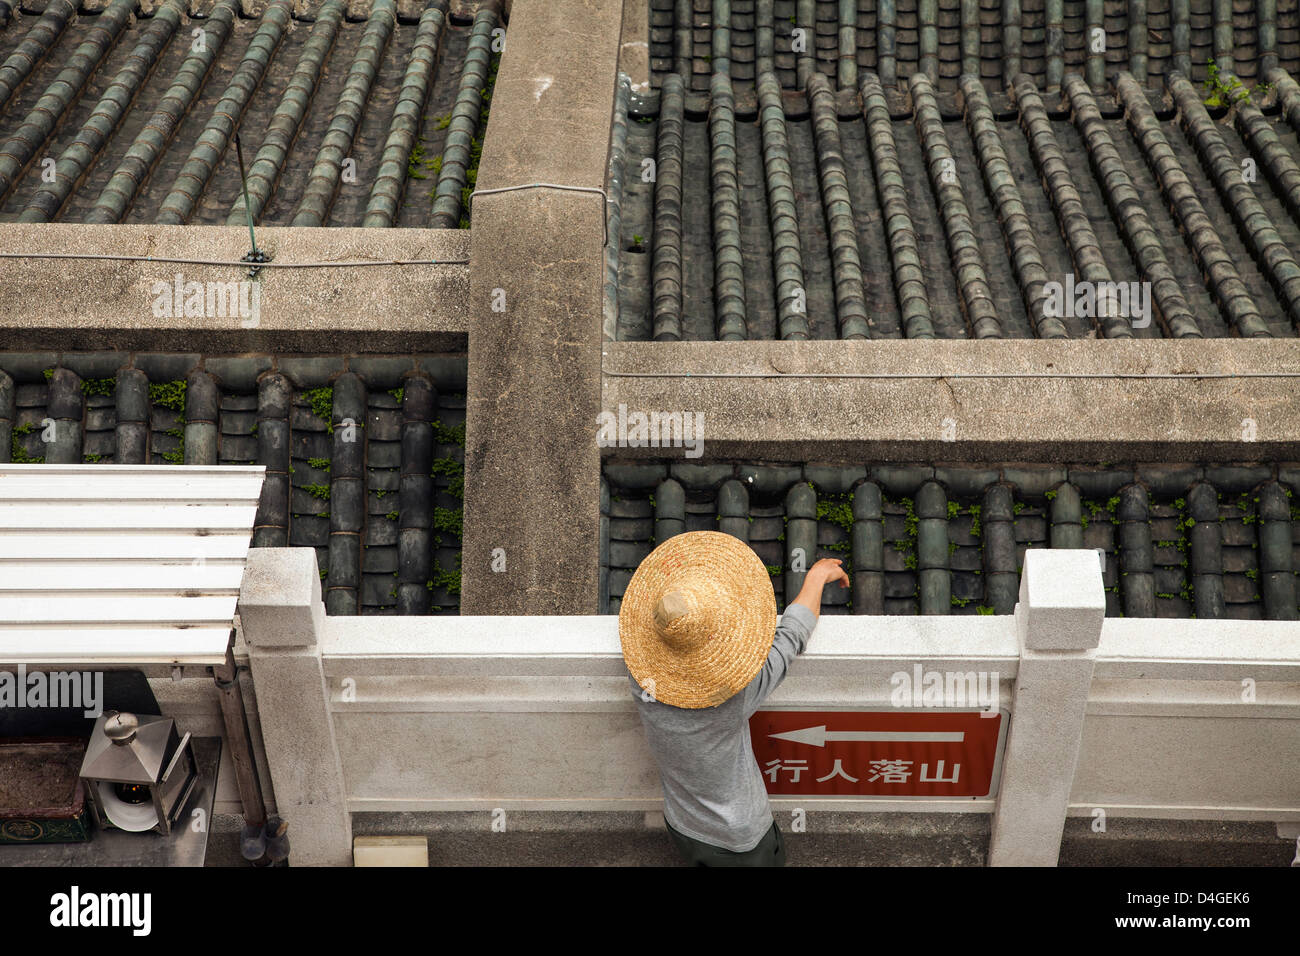 A worker in a cemetery in Hong Kong Stock Photo